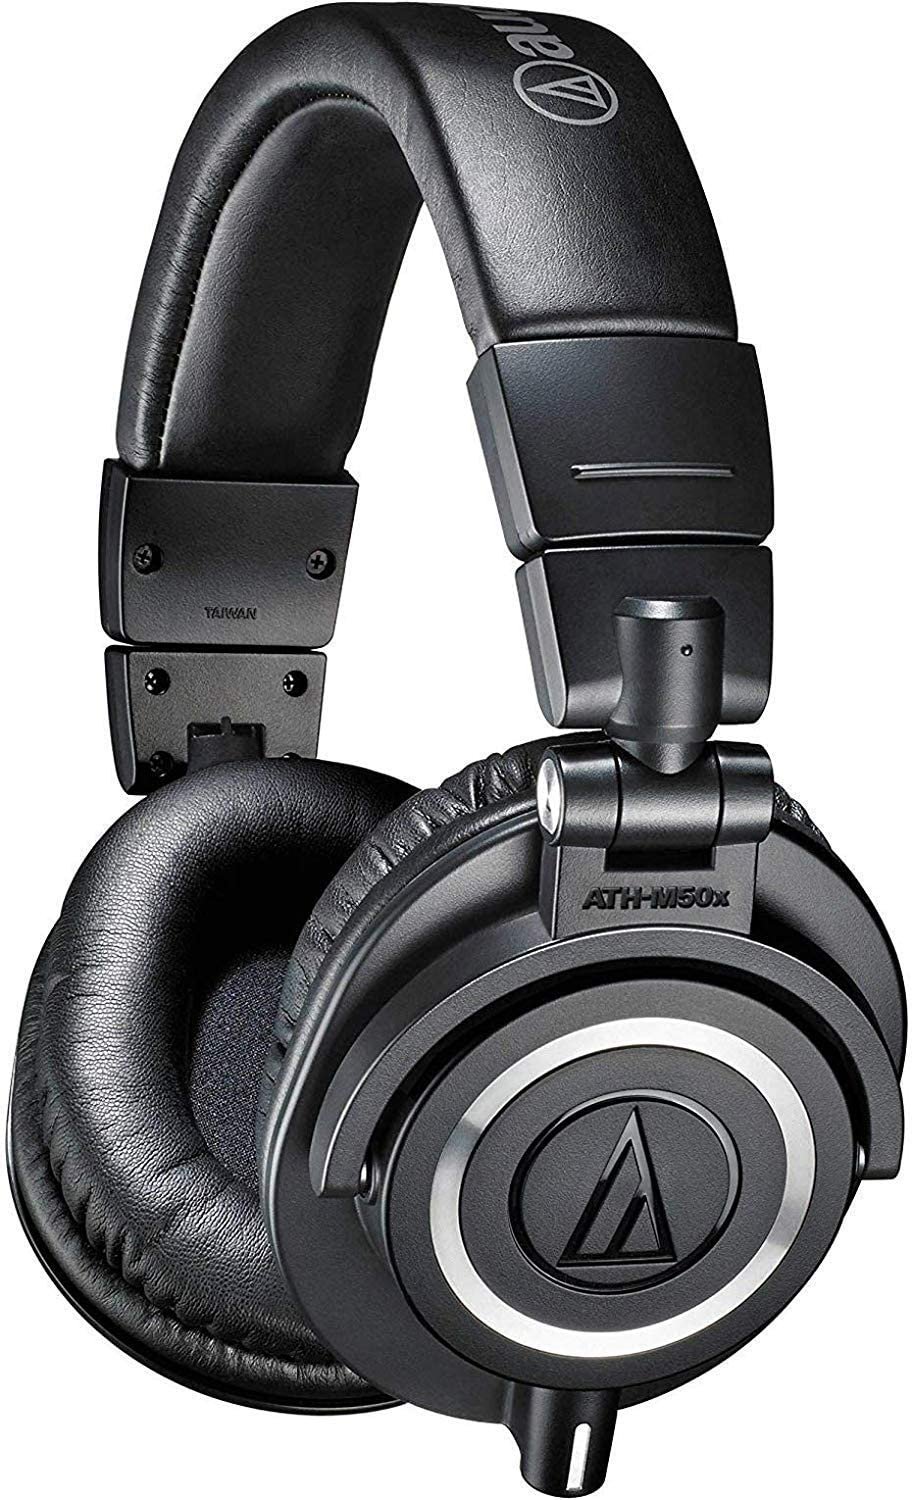 Audio-Technica is another pioneer in high-performance head phone in online